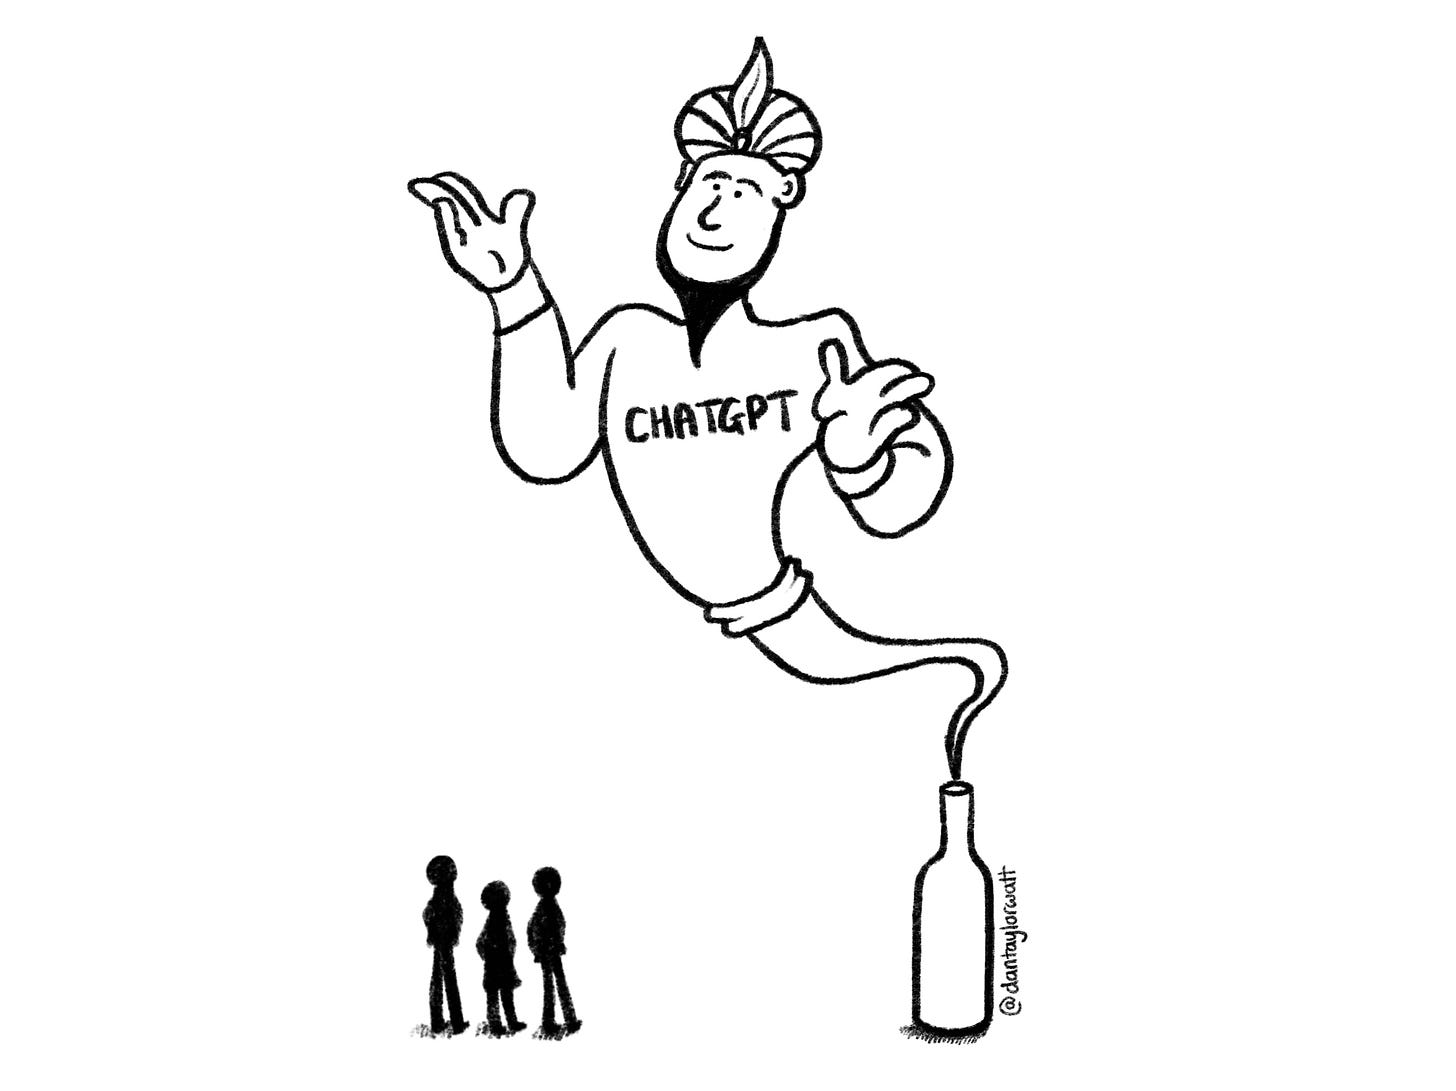 Cartoon of 3 figures in silhouette looking up at a huge ChatGPT genie emerging from a bottle